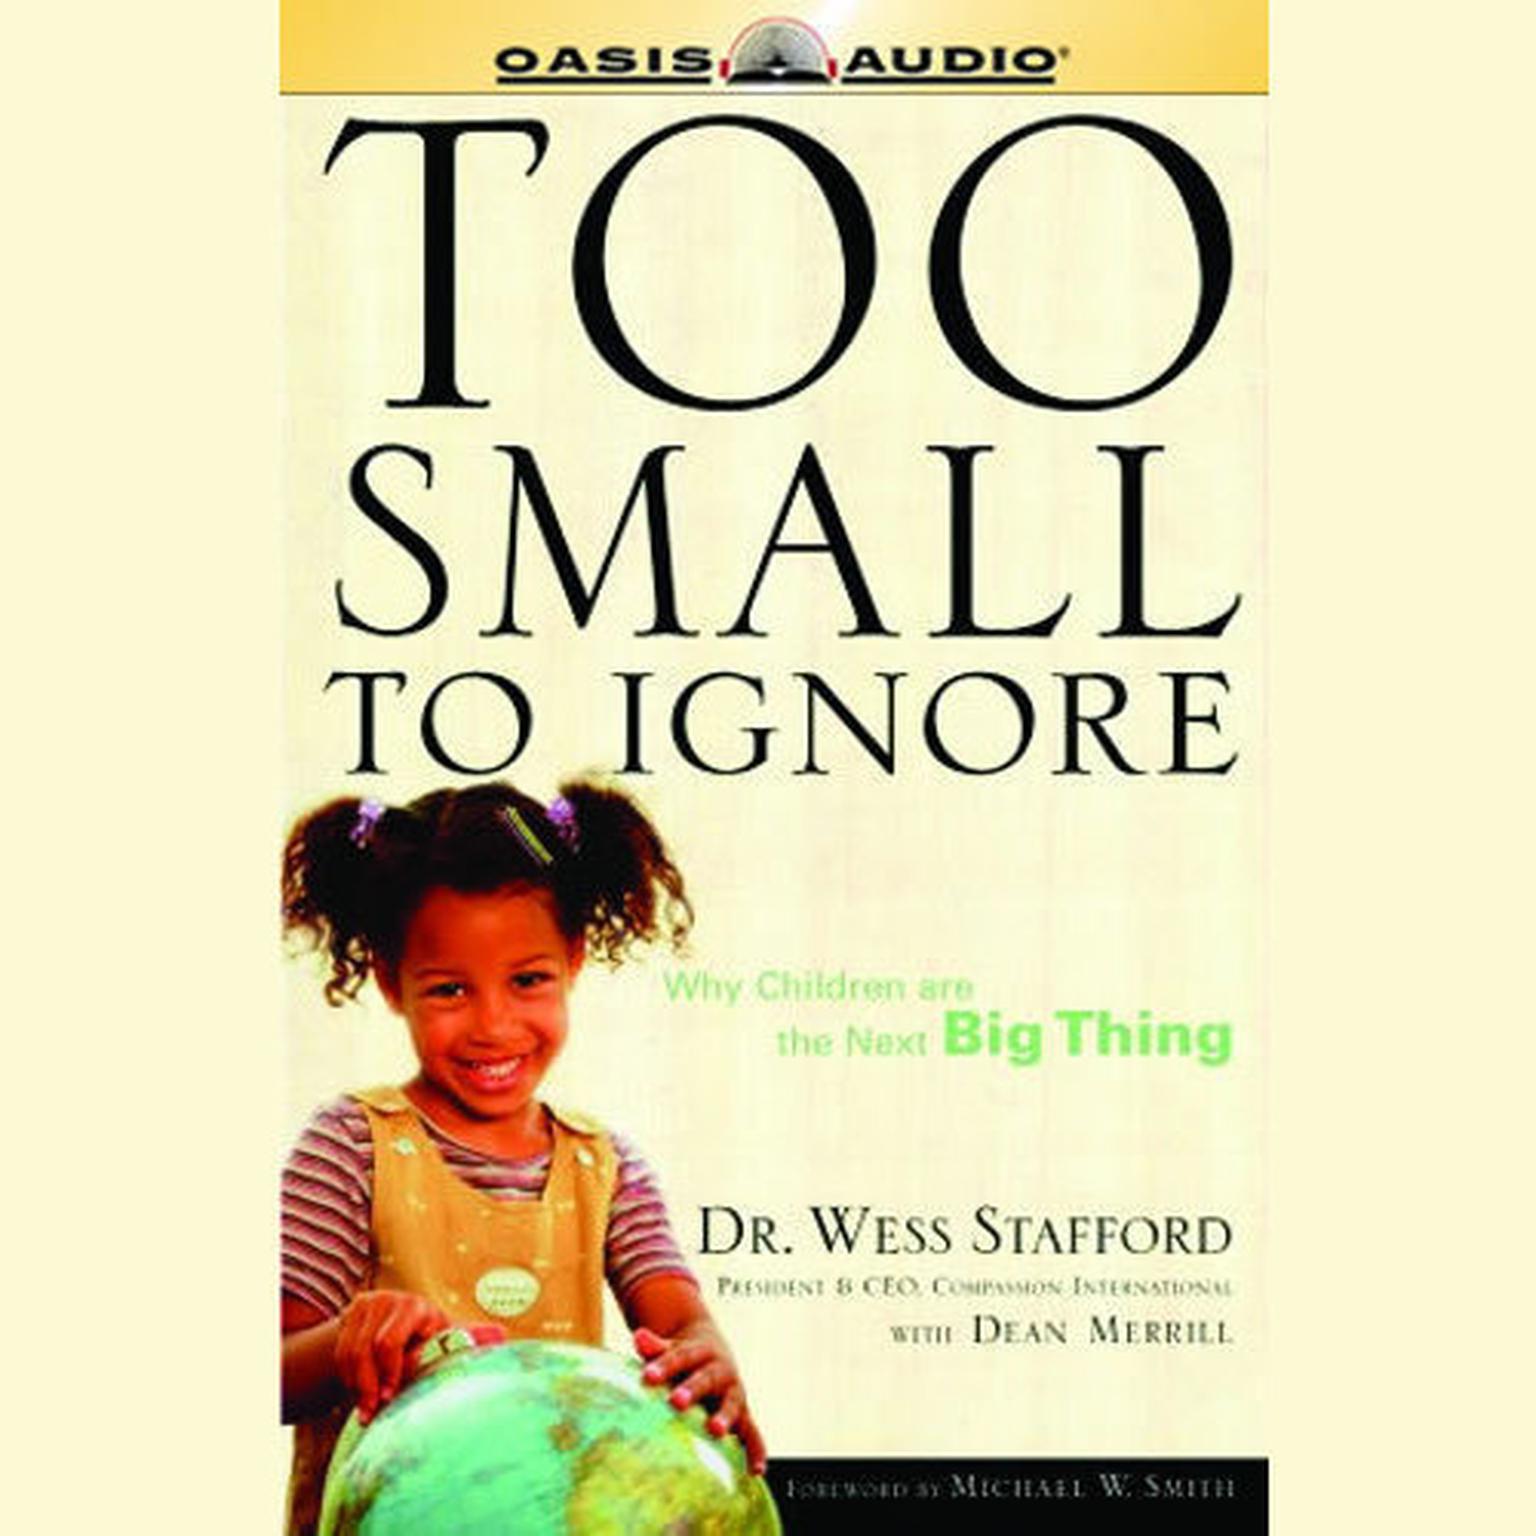 Too Small to Ignore (Abridged): Why Children Are the Next Big Thing Audiobook, by Wess Stafford